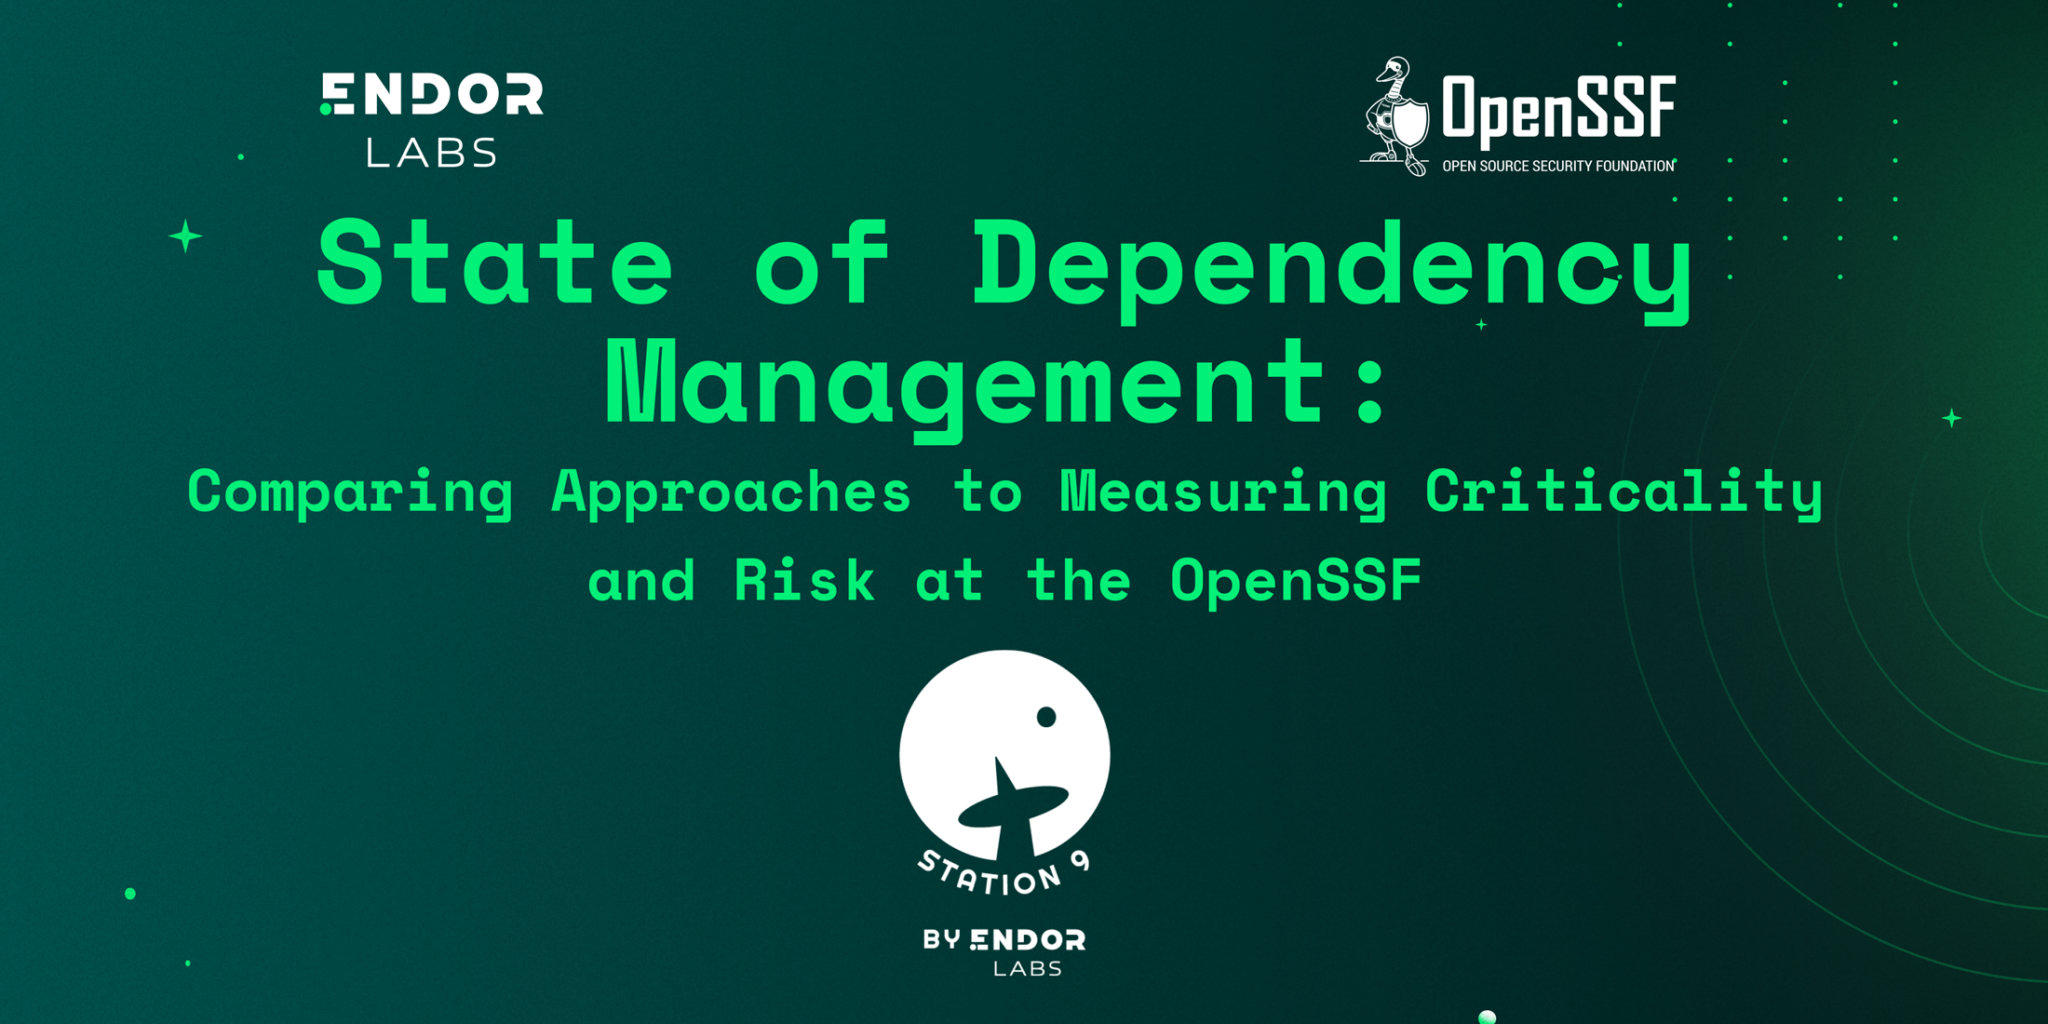 Comparing Approaches to Measuring Criticality and Risk at the OpenSSF